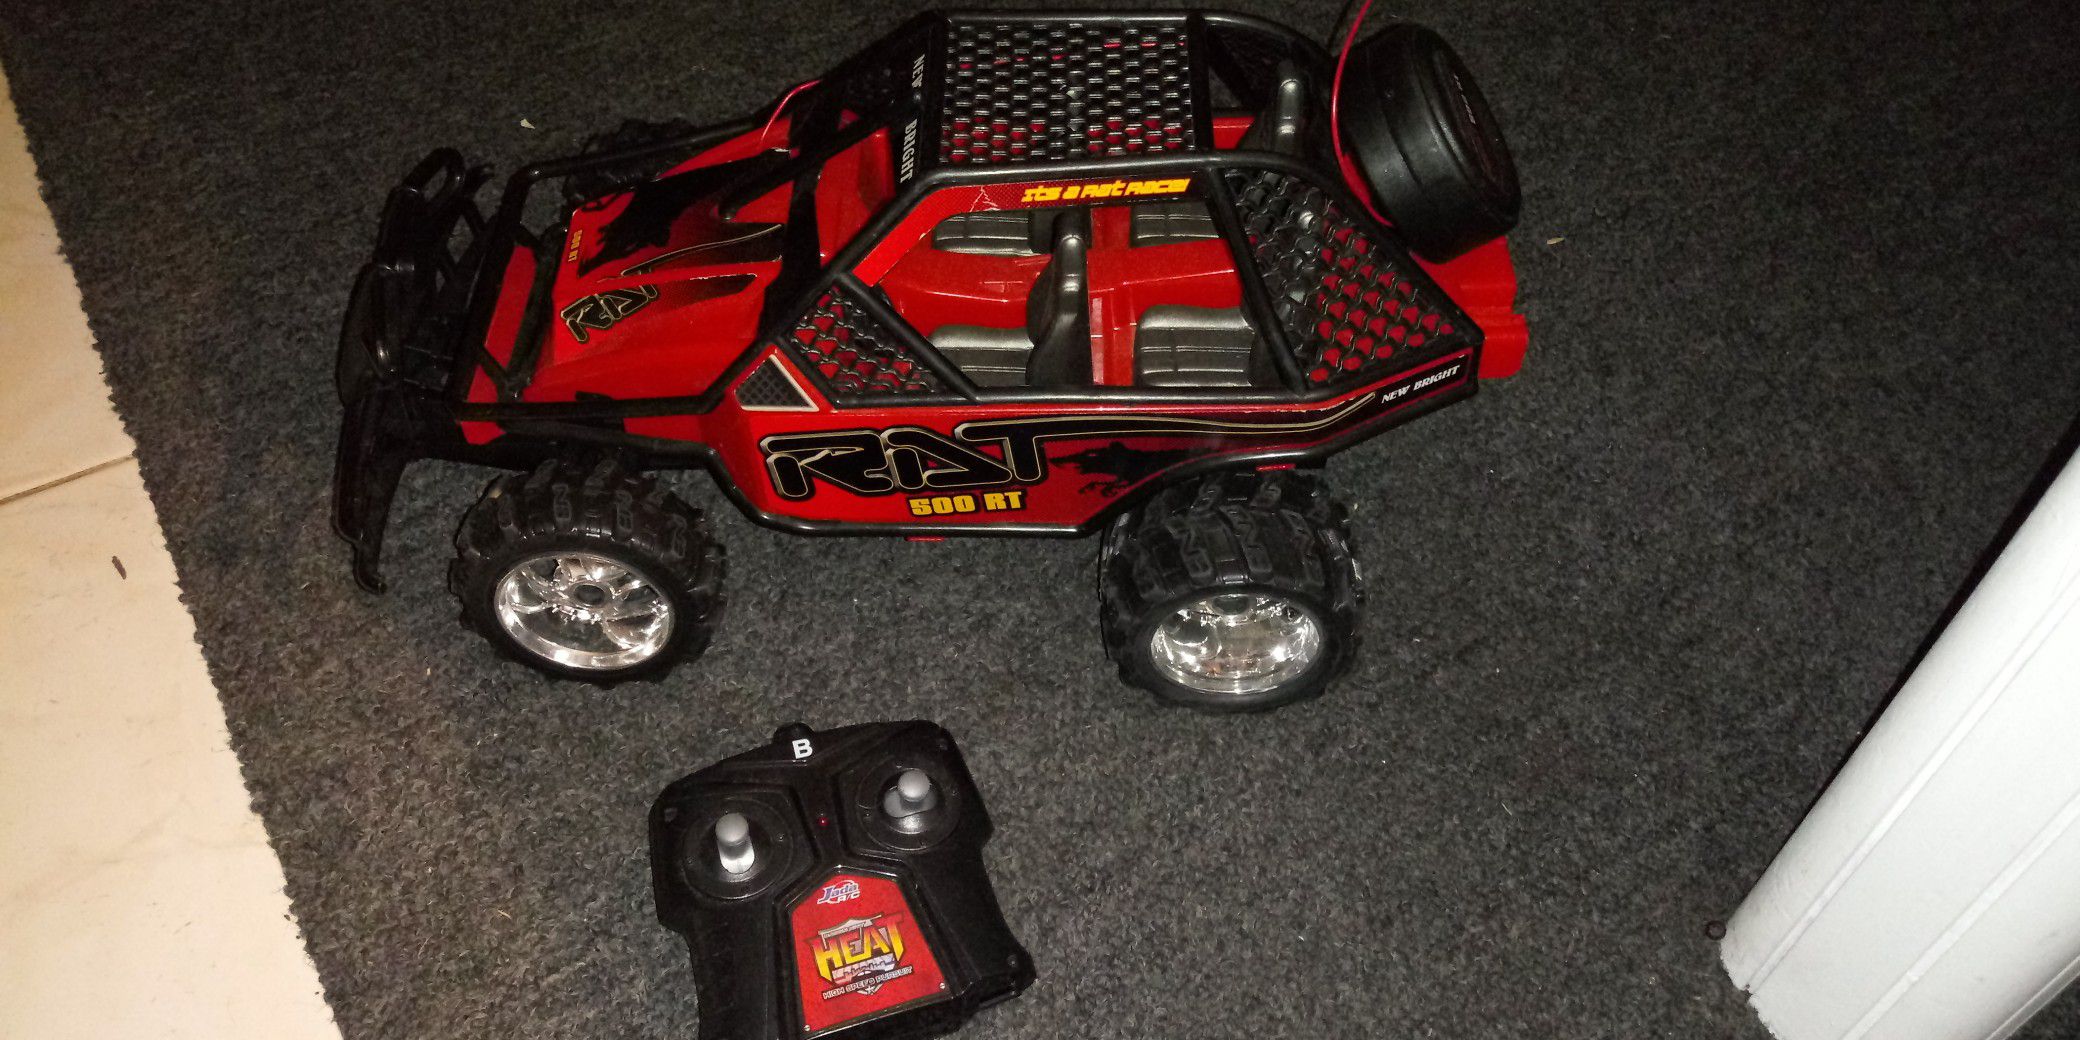 Remote control red buggy car with remote good condition 8 inches tall x 15 long